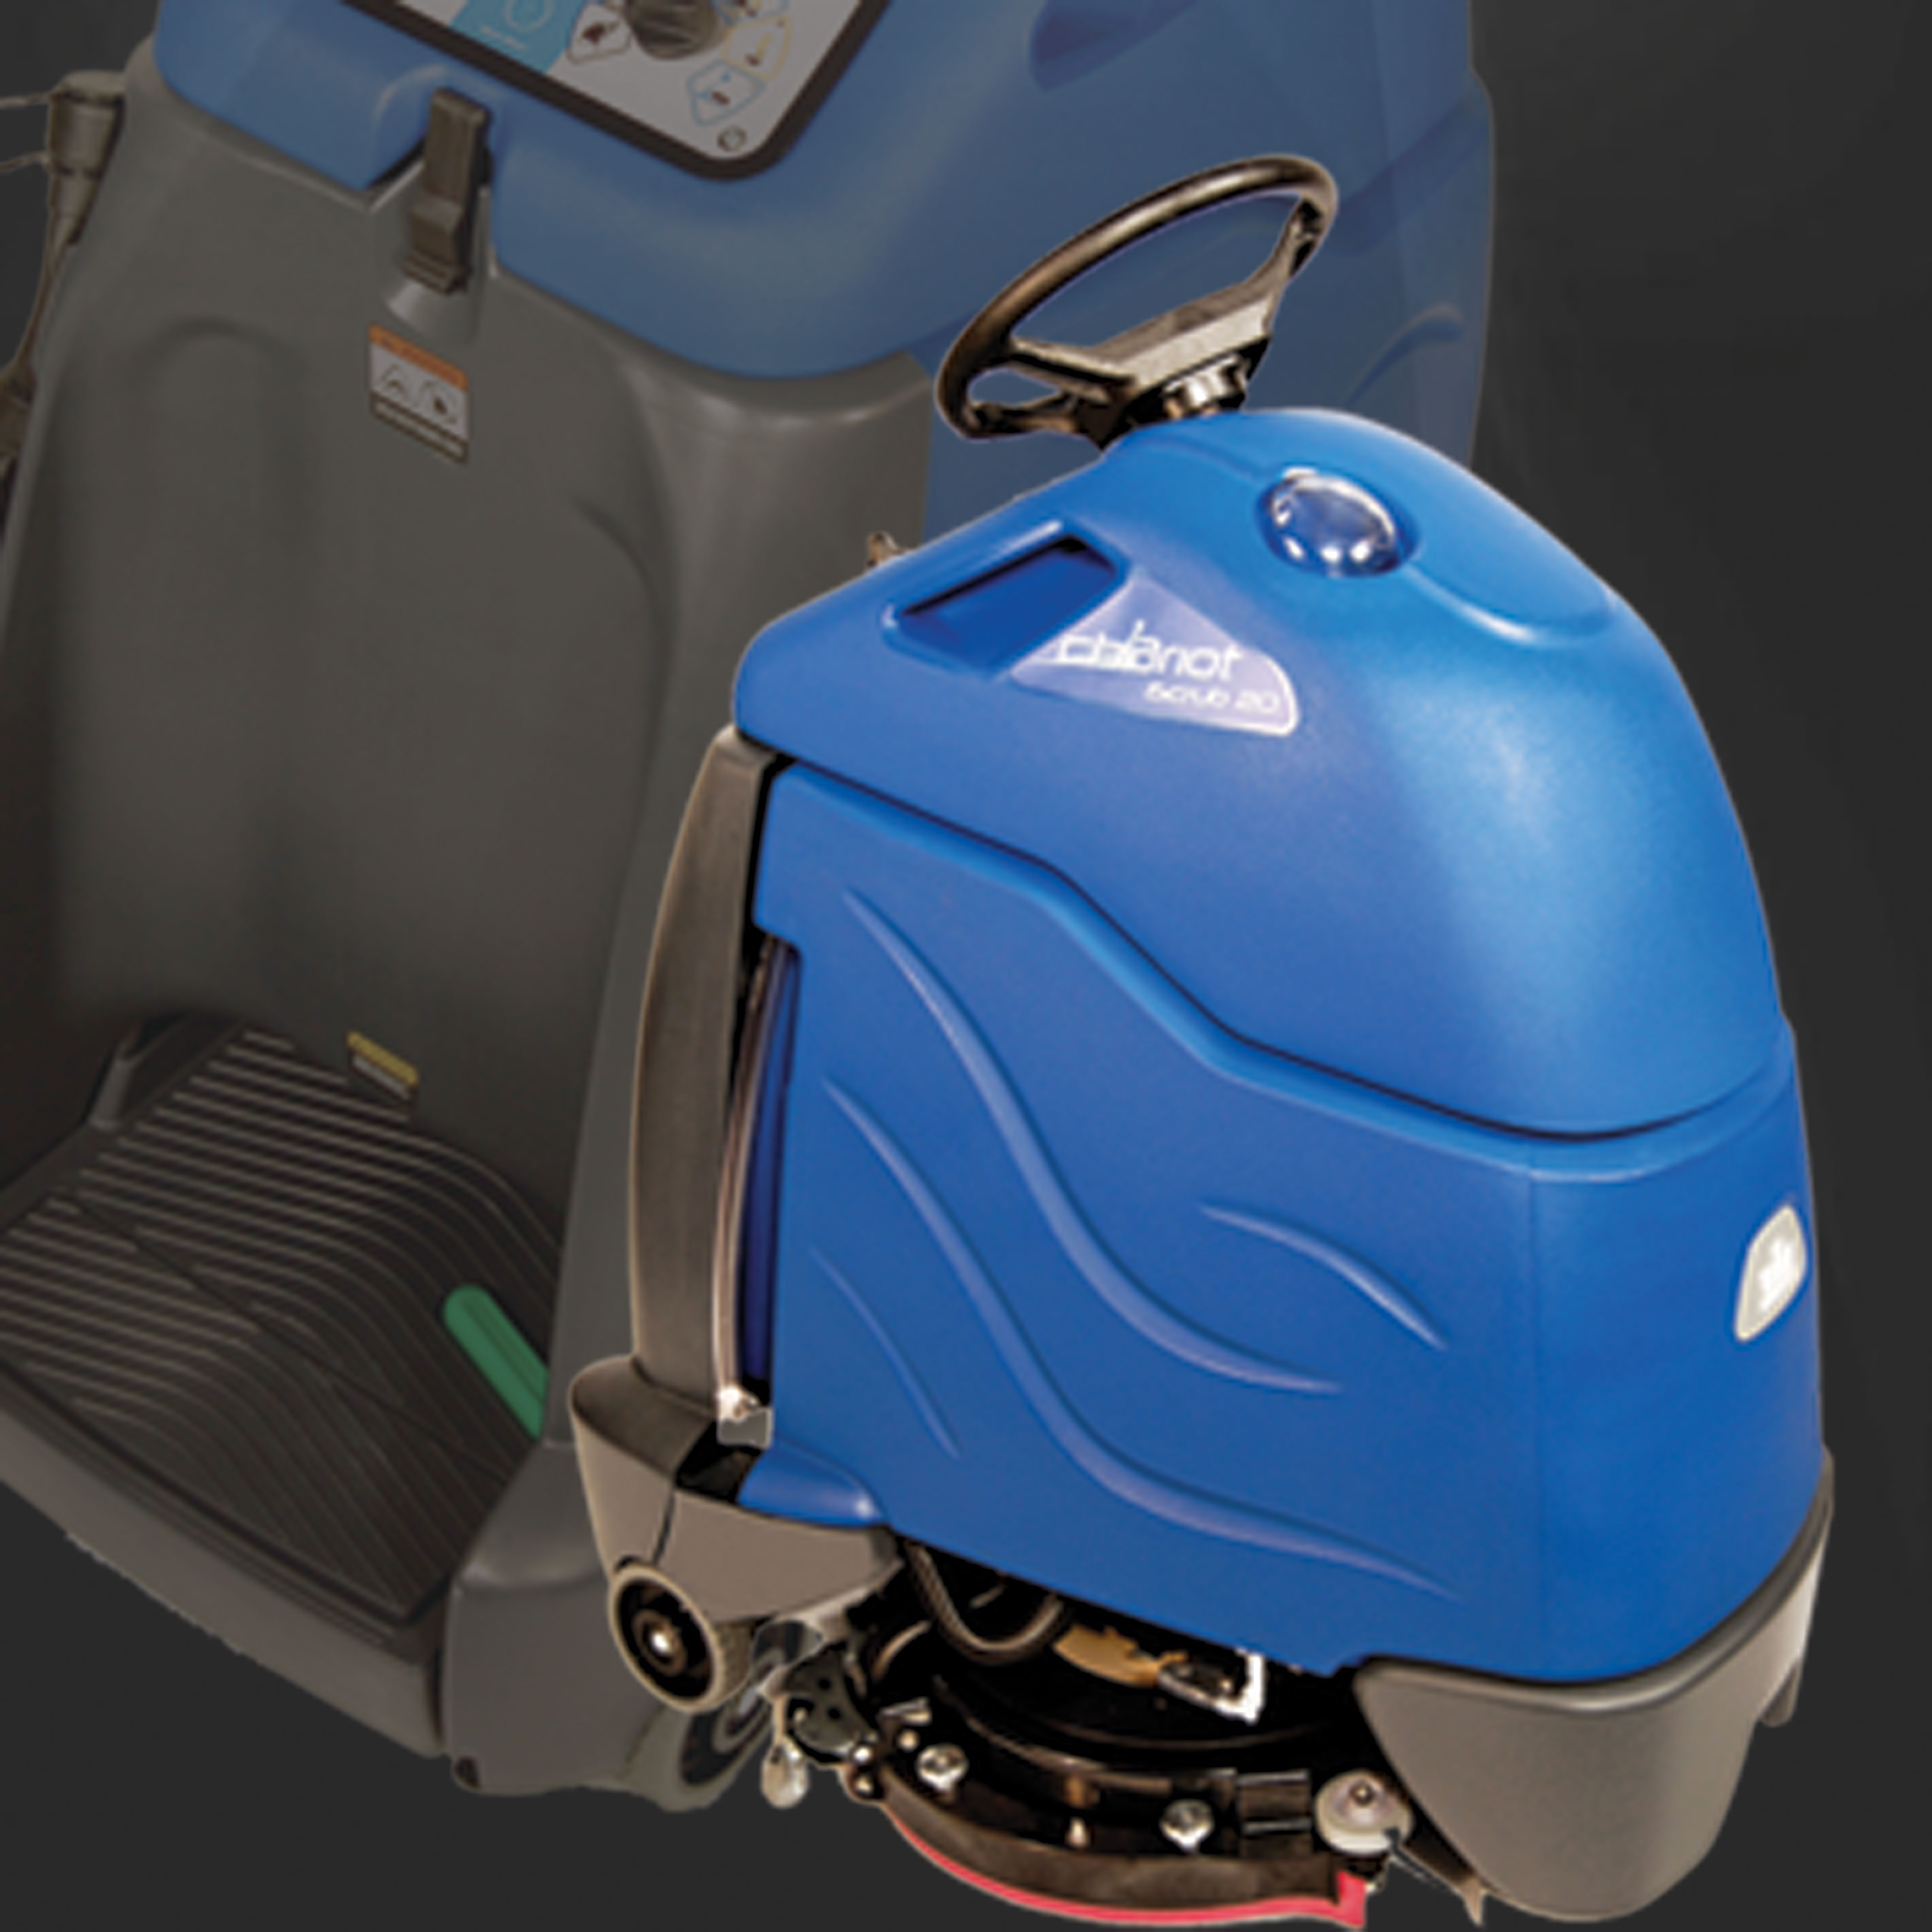 Stand-on floor scrubber